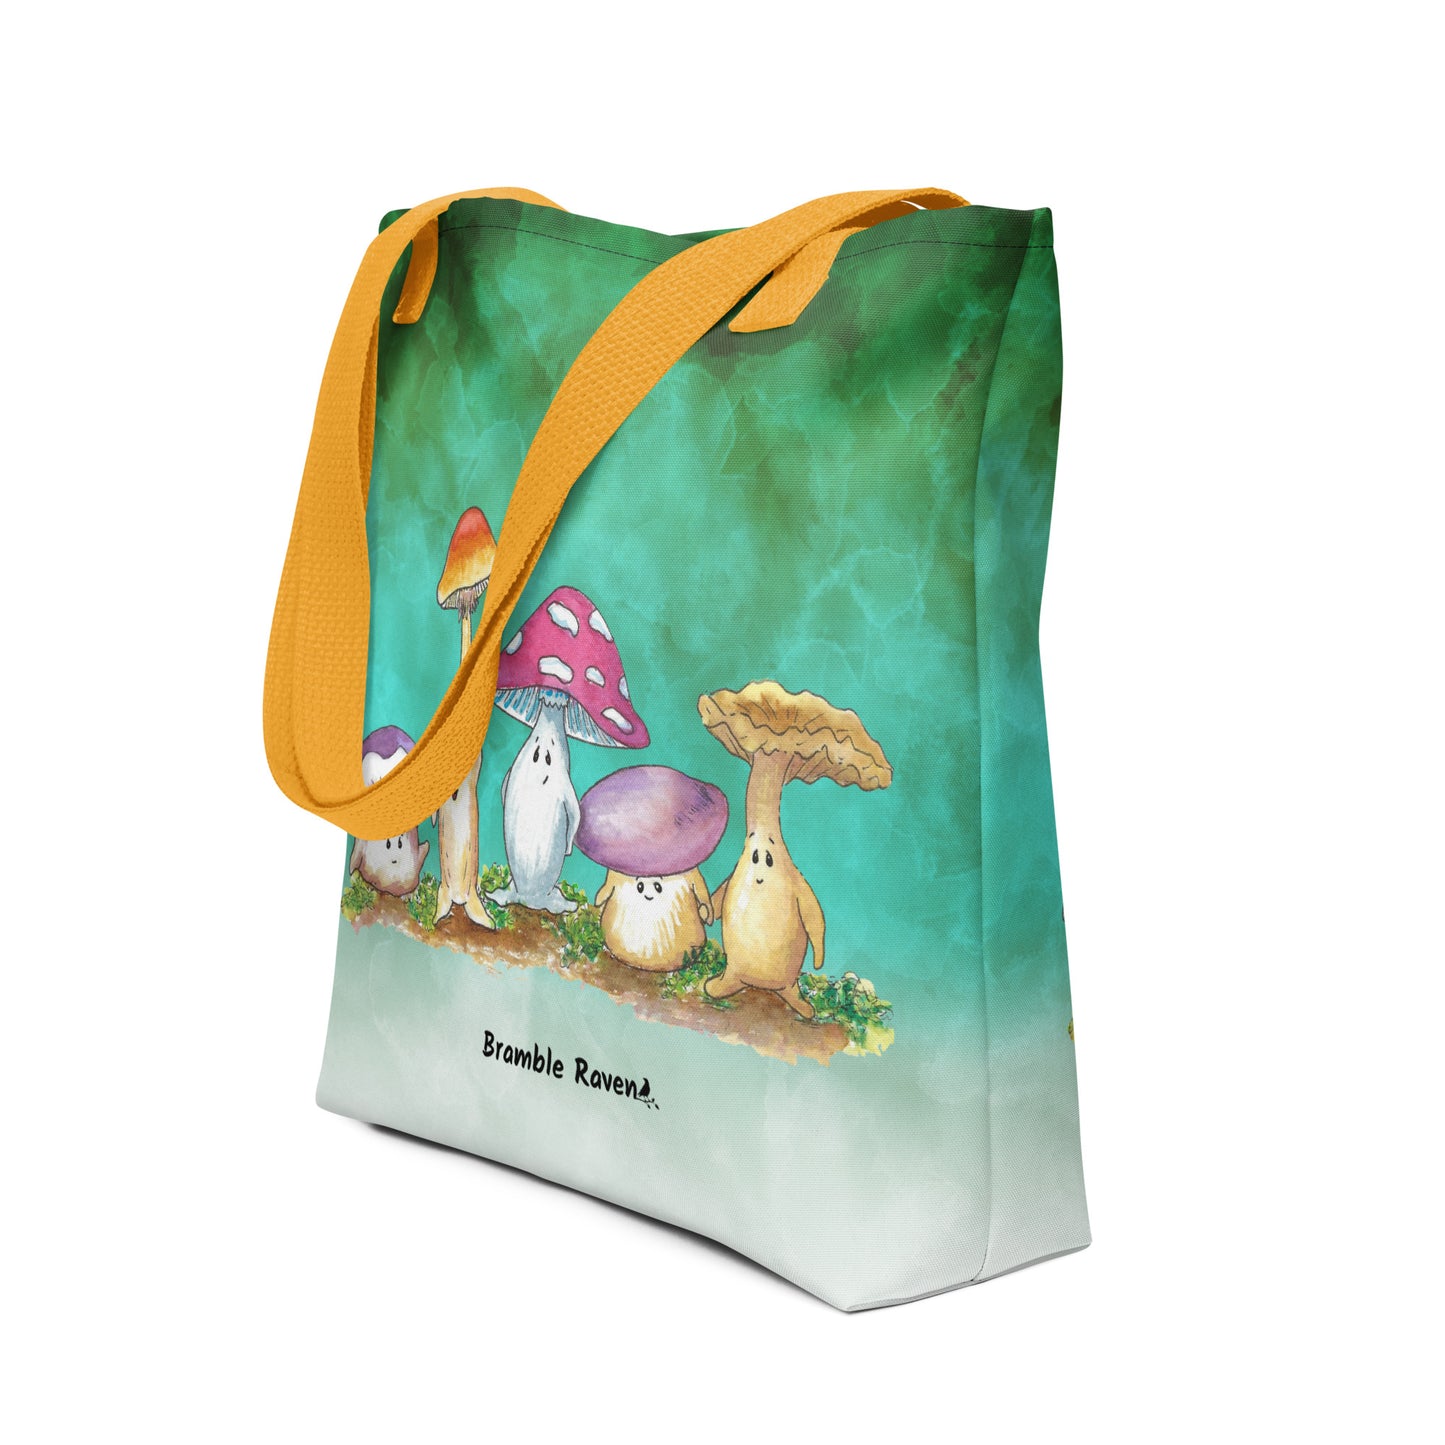 15 by 15 inch sturdy tote bag. Features Mushy and his whimsical mushroom friends on a green gradient background. Made of spun polyester with yellow cotton bull denim handles. Shown sitting on tabletop.